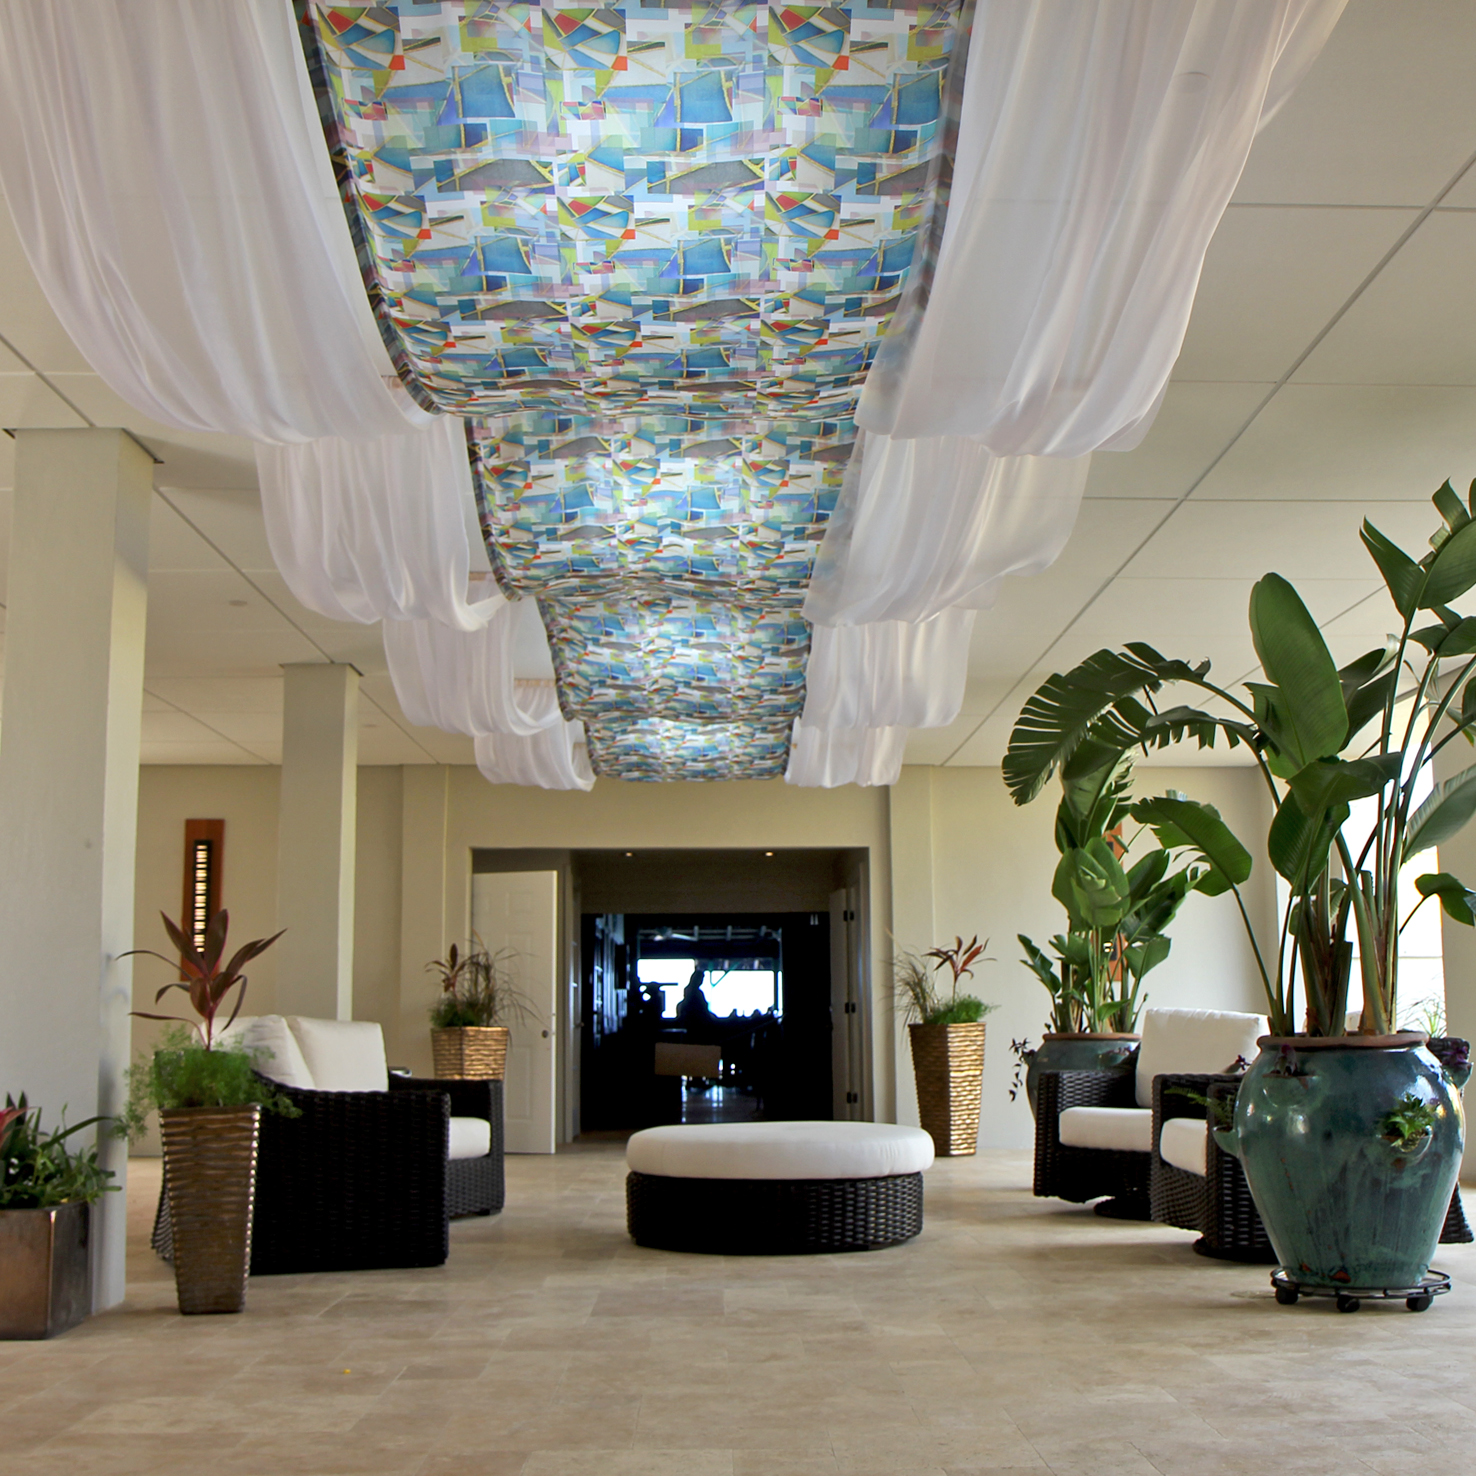 Hotel Caravelle's new lobby features textite art by Debbie Sun.